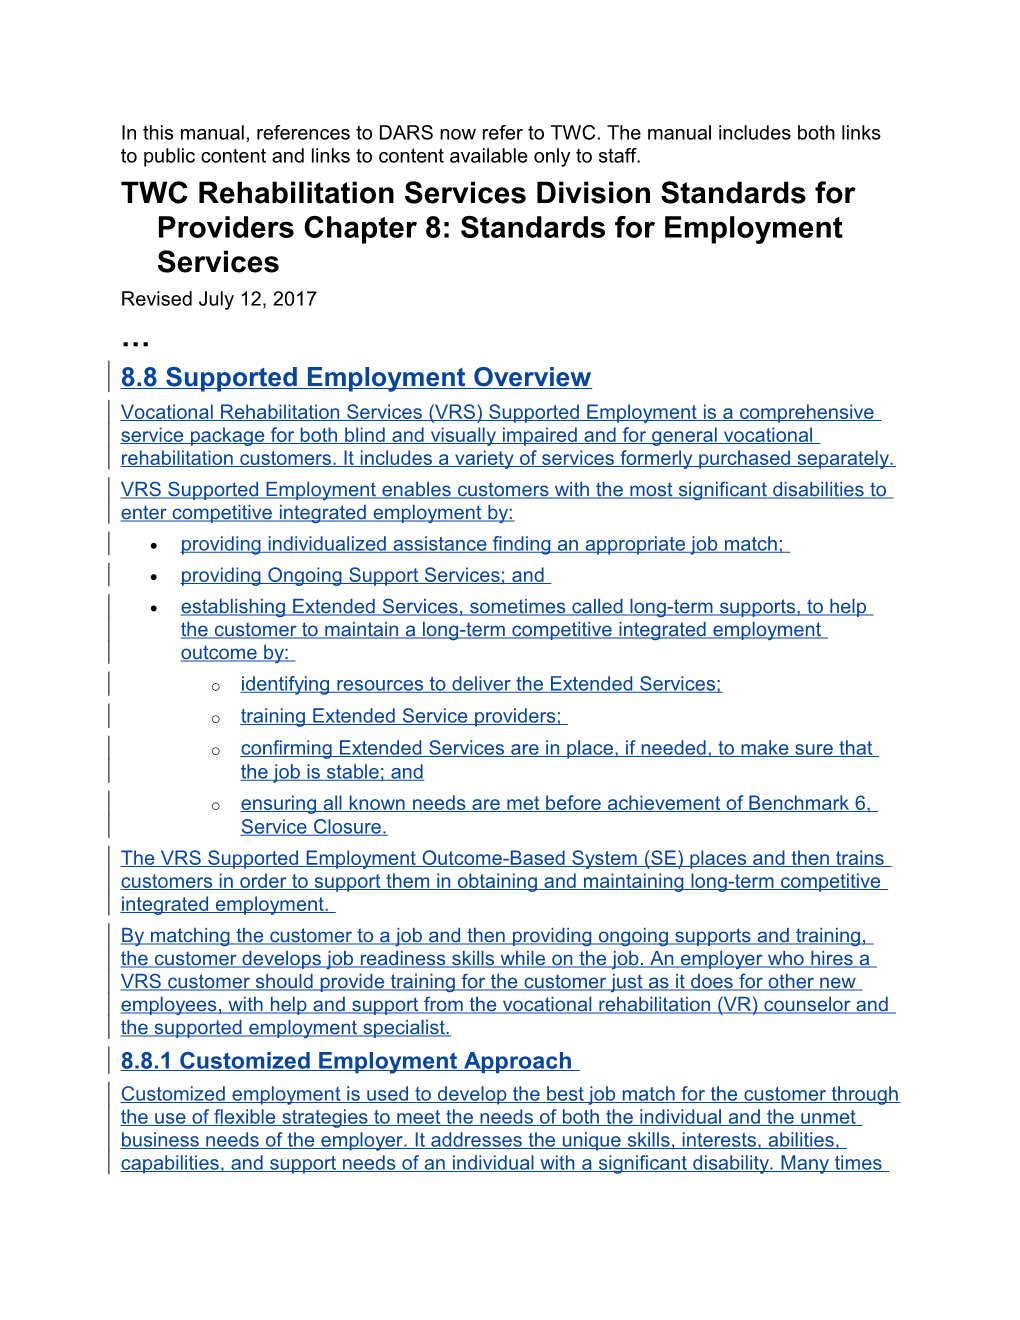 TWC Rehabilitation Services Division Standards for Providers Chapter 8 Revisions, July 2017